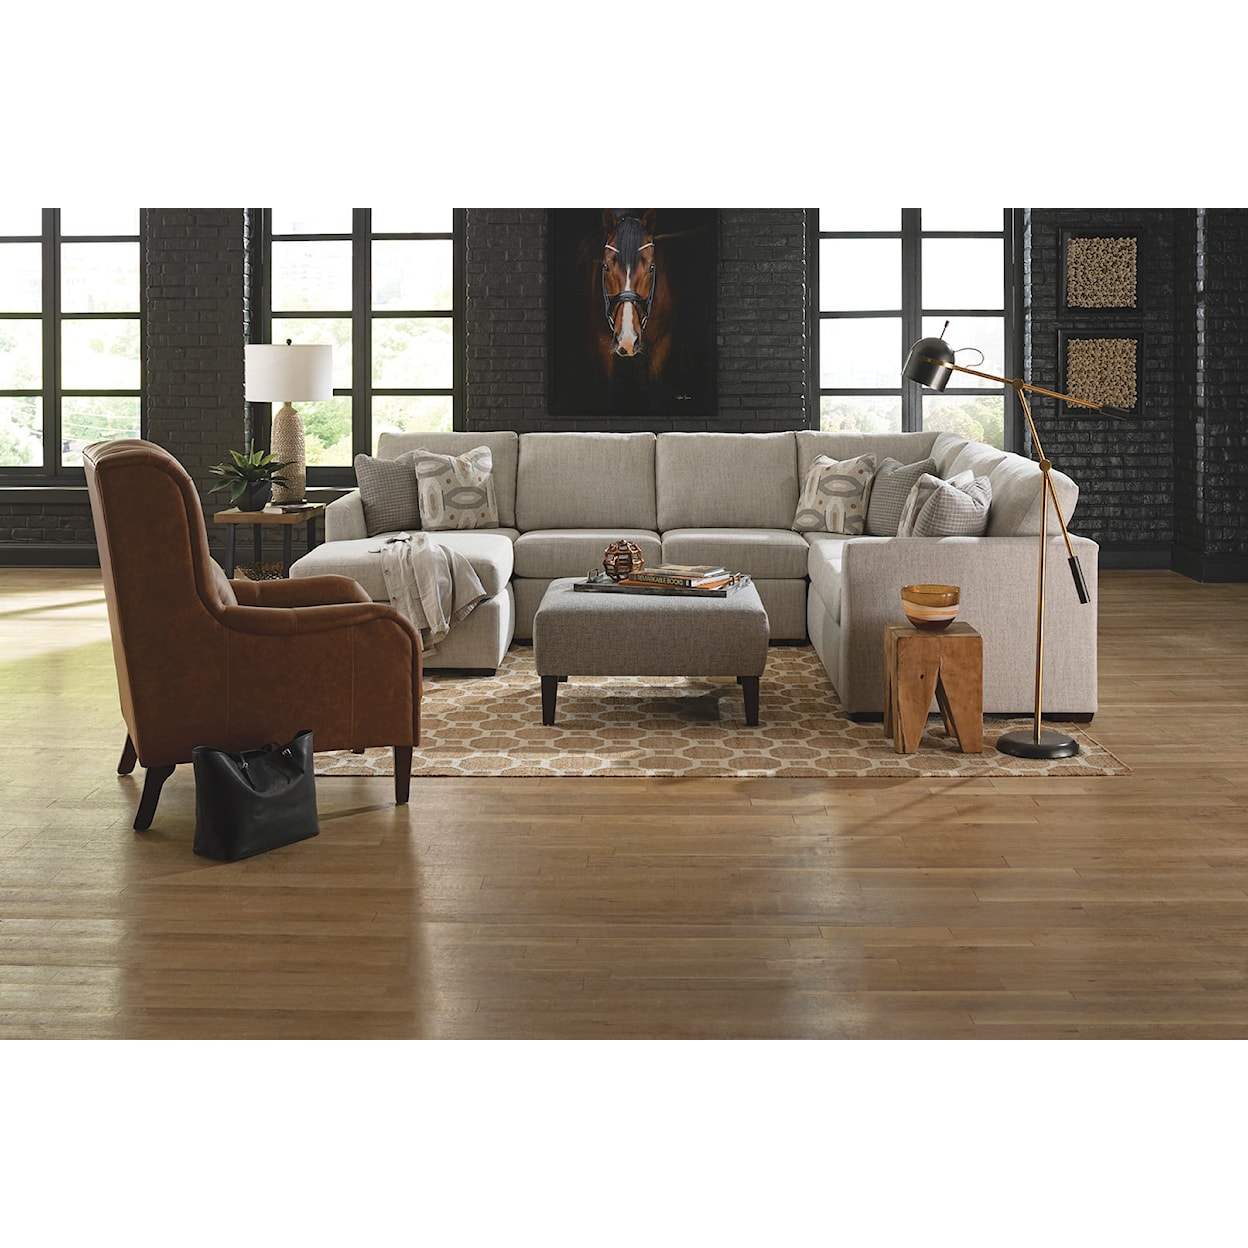 Dimensions 3450 Series 3-Piece Chaise Sectional Sofa